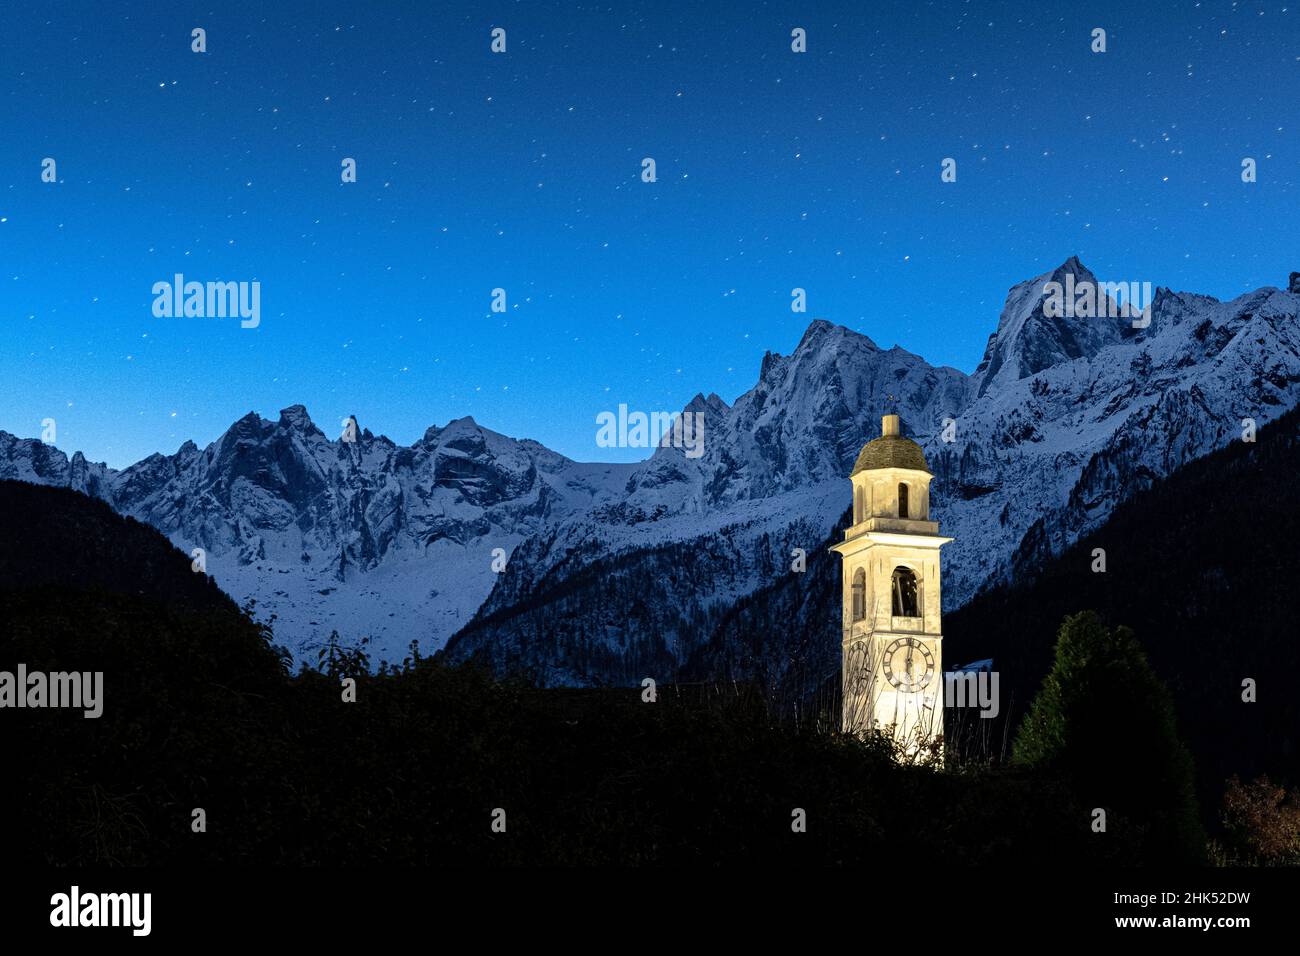 Illuminated bell tower and Sciore mountain range covered with snow under the starry sky, Soglio, Graubunden, Switzerland, Europe Stock Photo